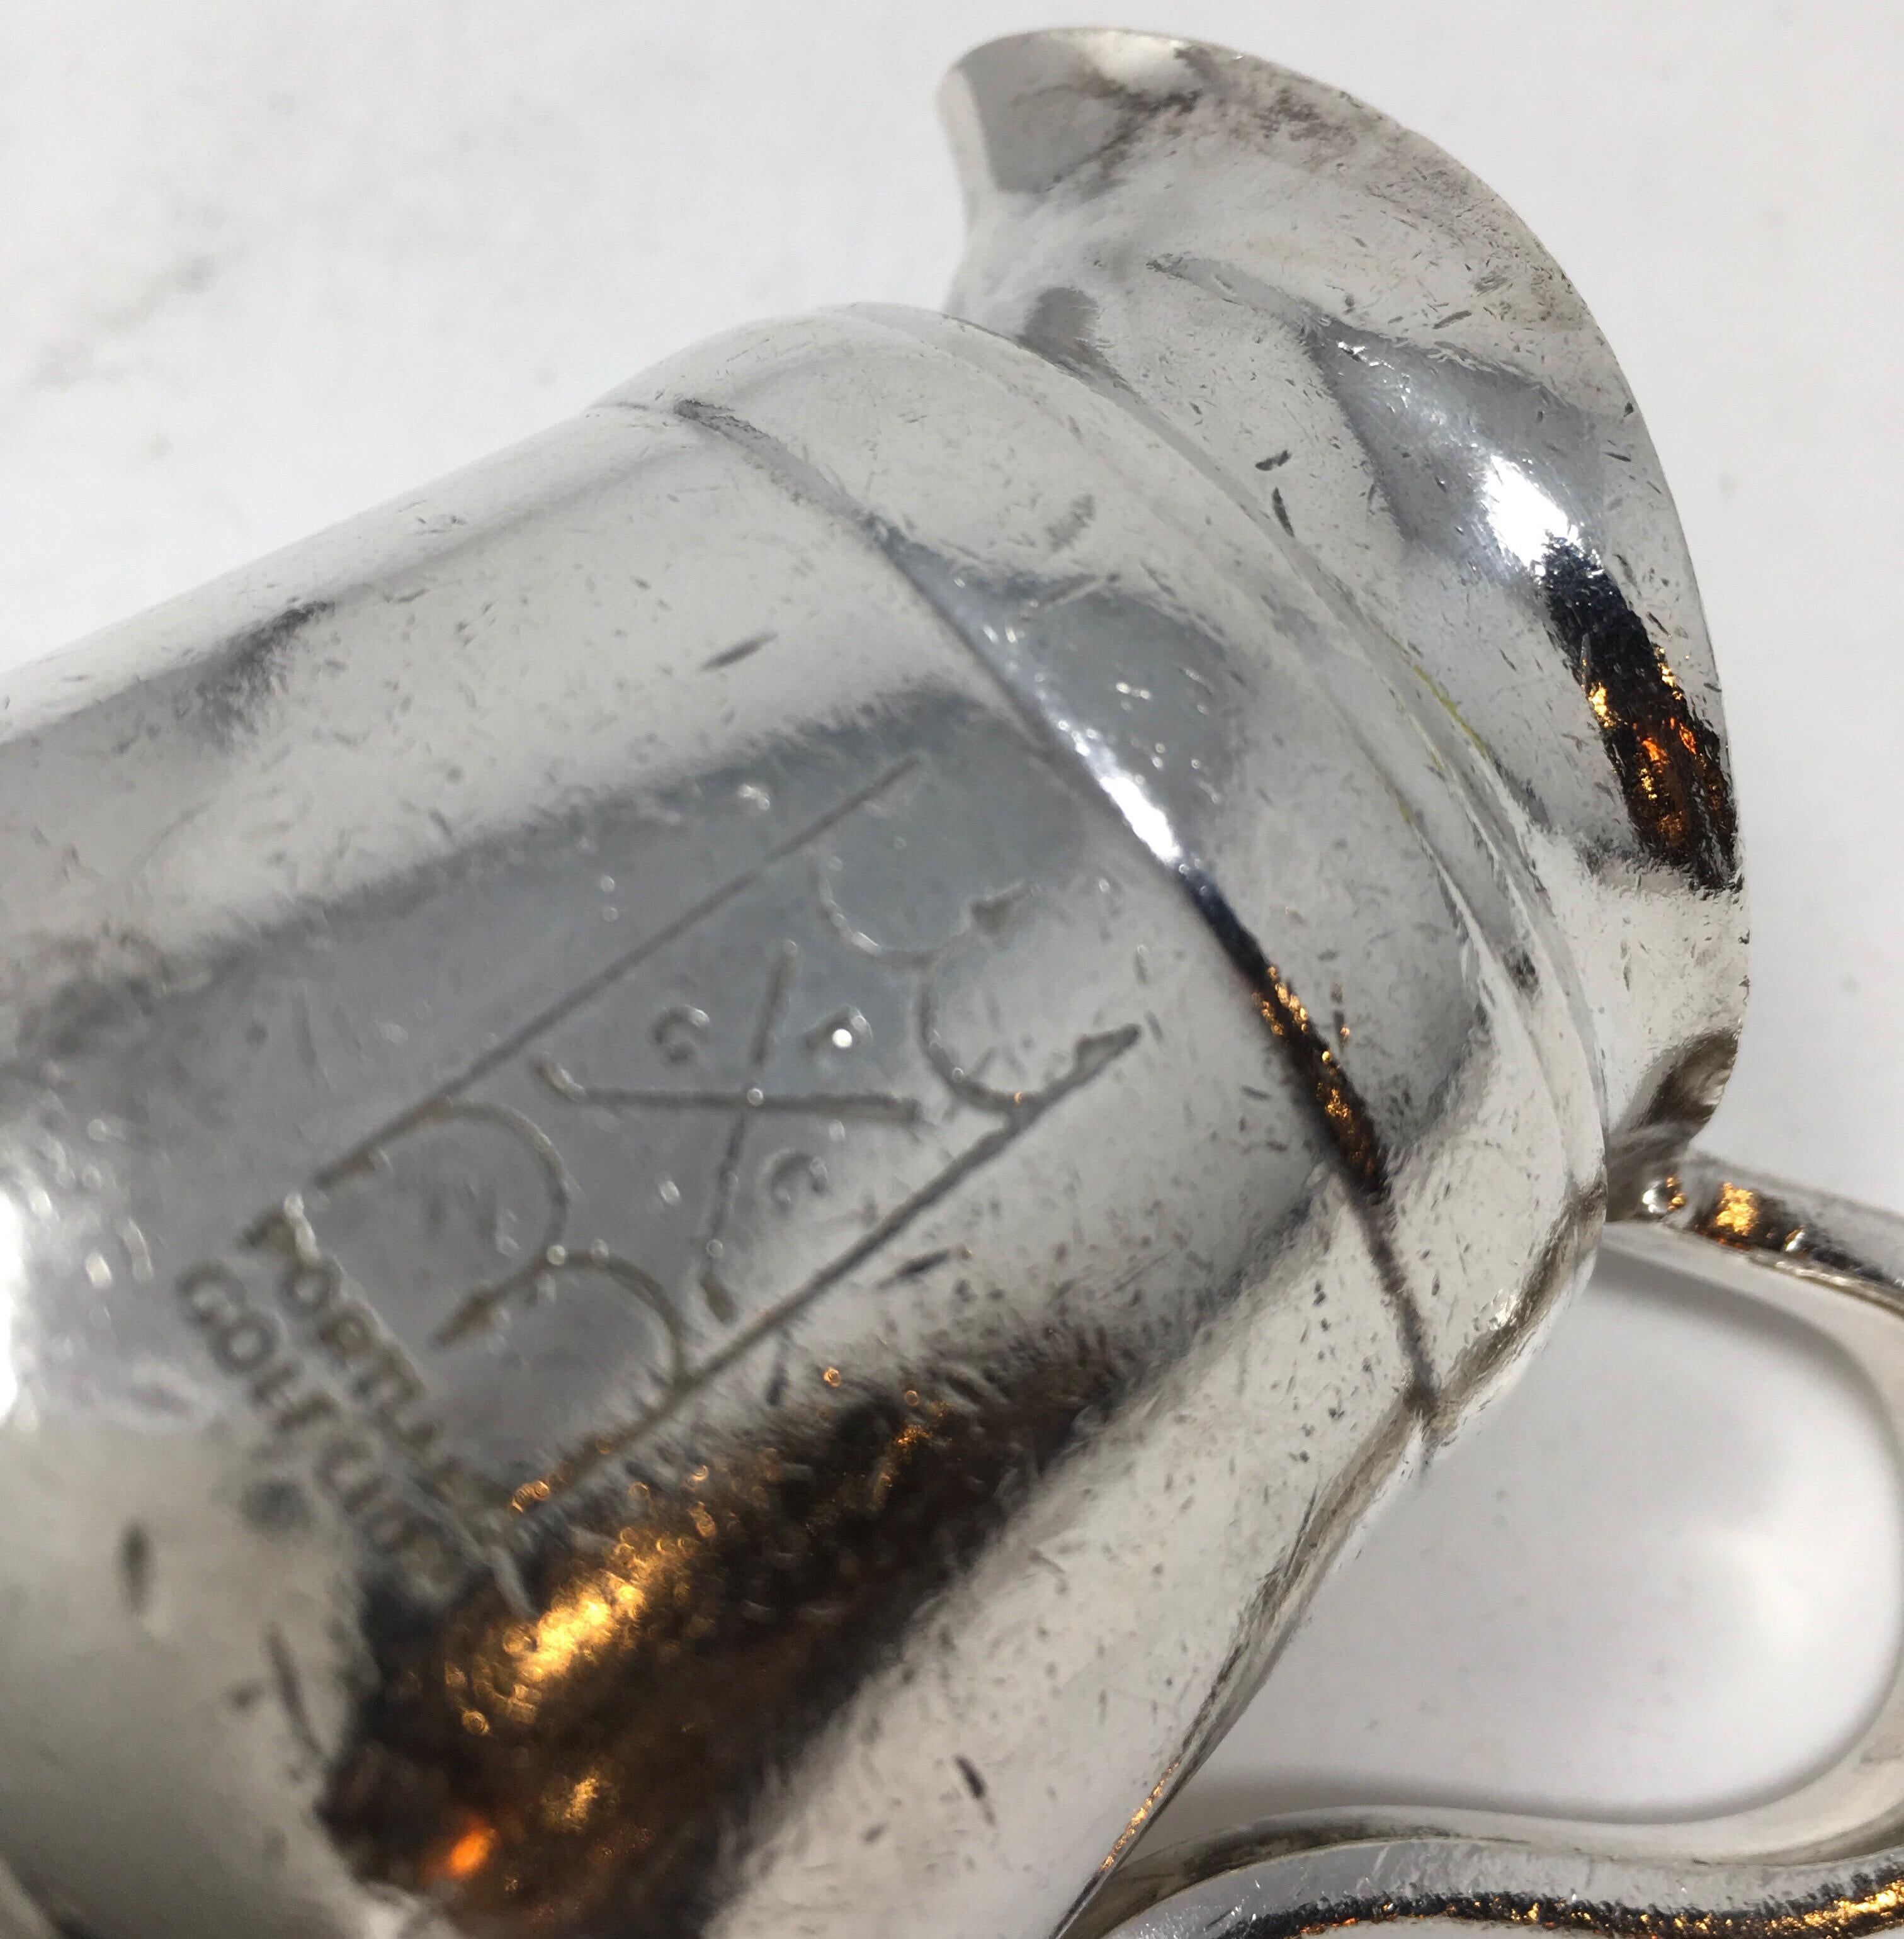 This vintage hotel silverplate creamer is fully hallmarked on the underside Reed & Barton, Silver Soldered, 2800 4oz, Portland Golf Club. Bearing the mark P G C, Portland Golf Club on the side, this creamer has been well used and the imperfections